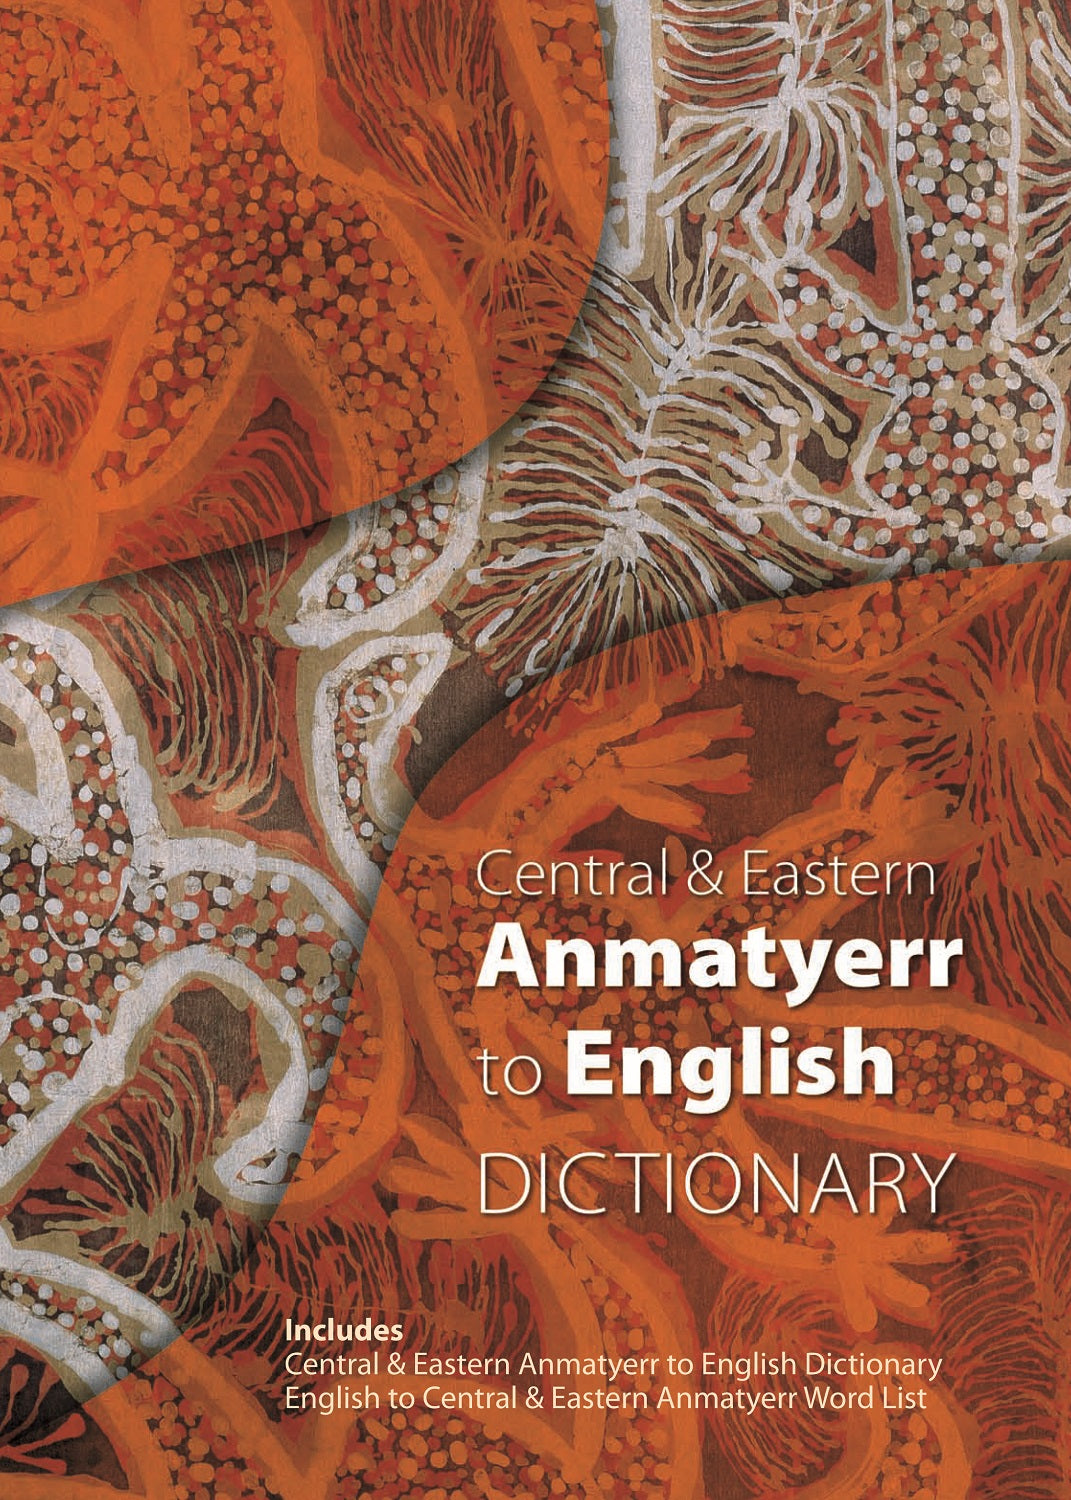 Central&Eastern Anmatyere to Eng. Dictionary | IAD Press | Australian Aboriginal Publisher & Book Shop